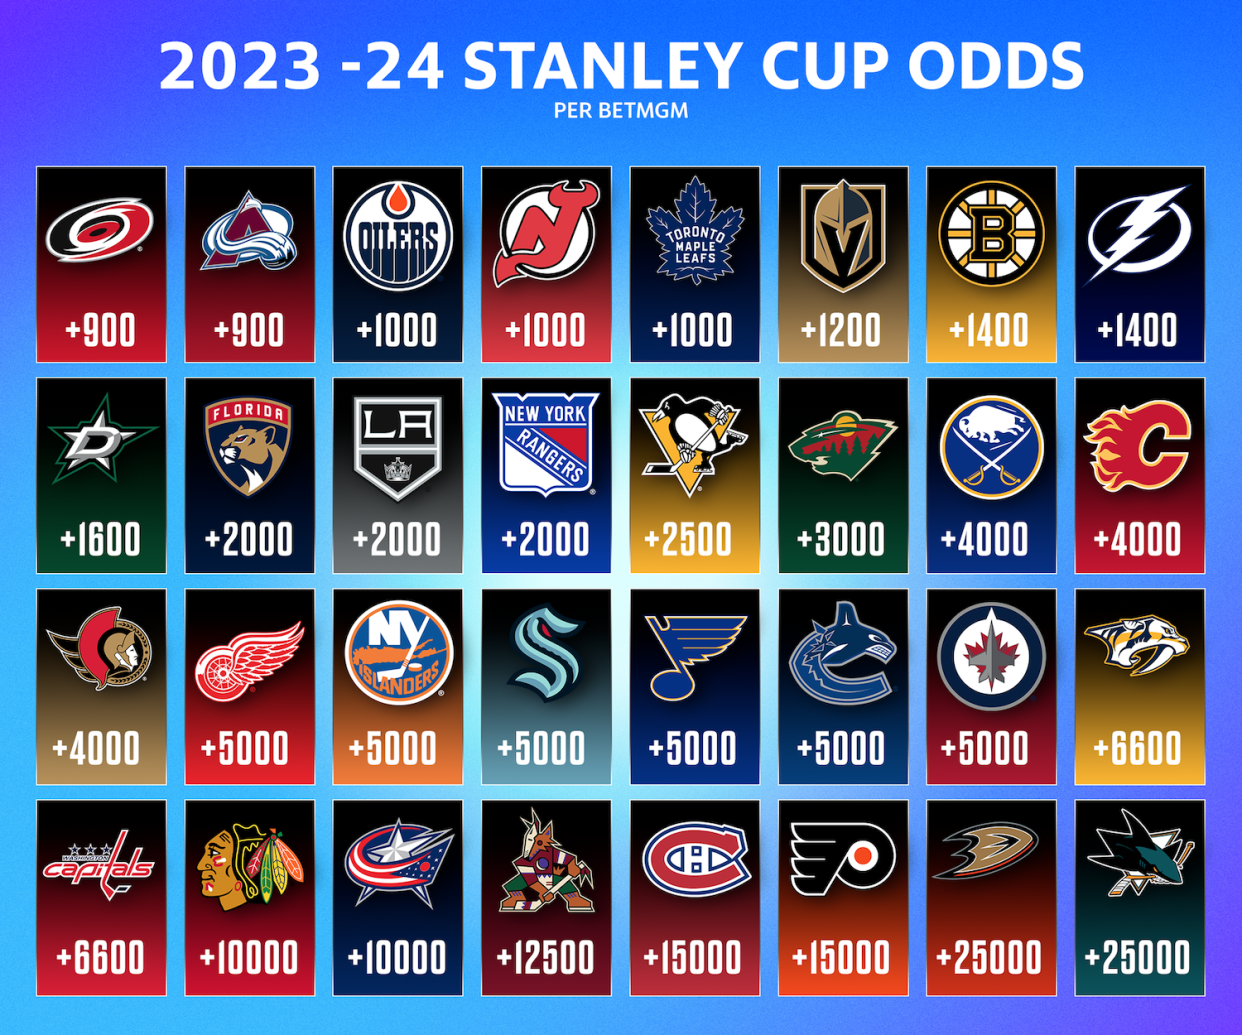 The Hurricanes and Avalanche are preseason co-favorites to win the title. (Yahoo Sports)